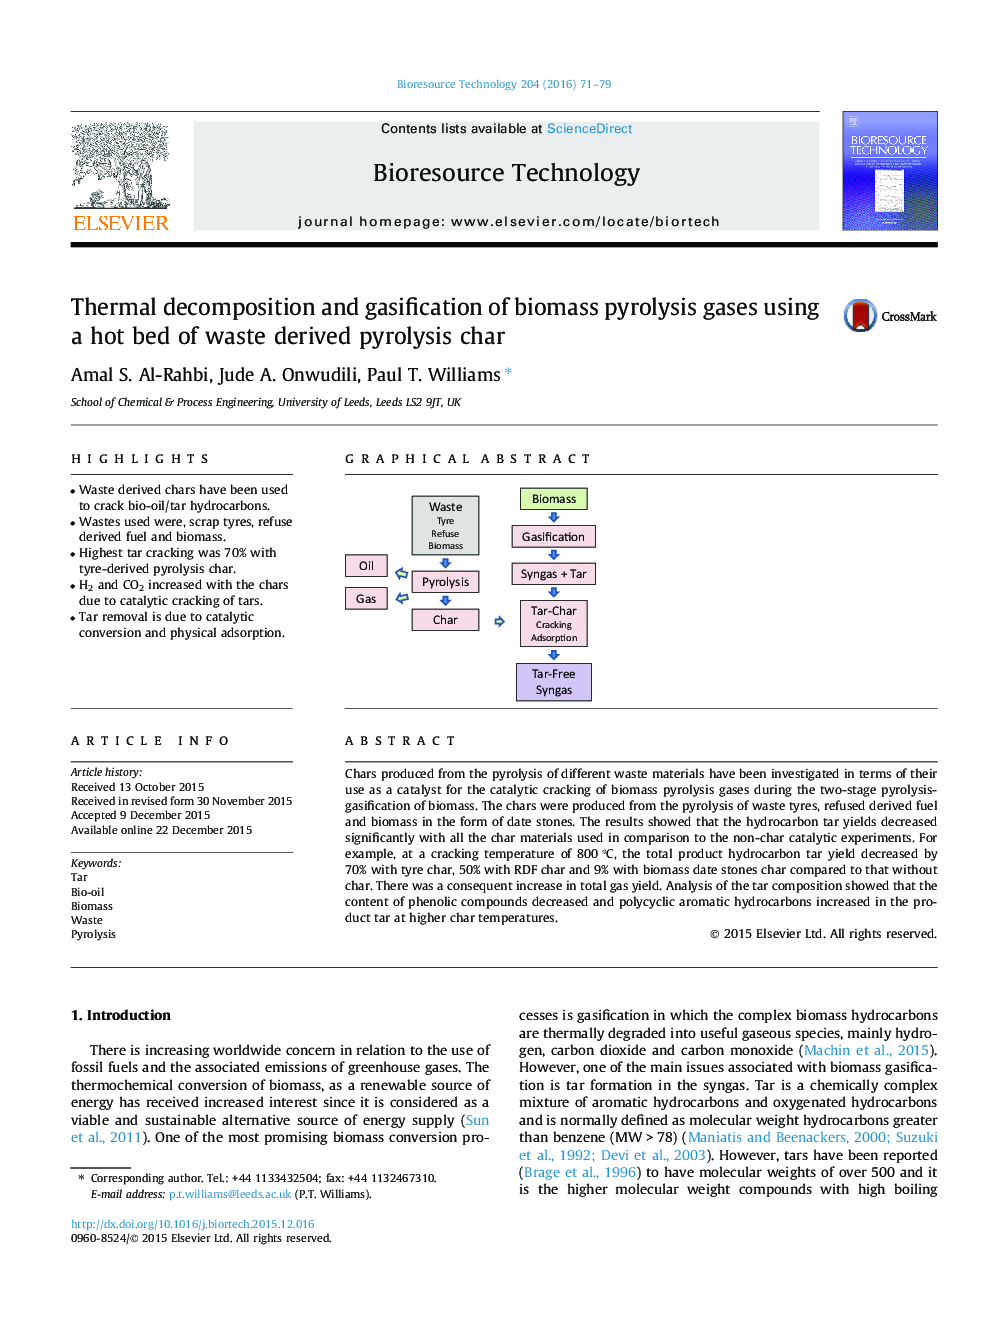 Thermal decomposition and gasification of biomass pyrolysis gases using a hot bed of waste derived pyrolysis char